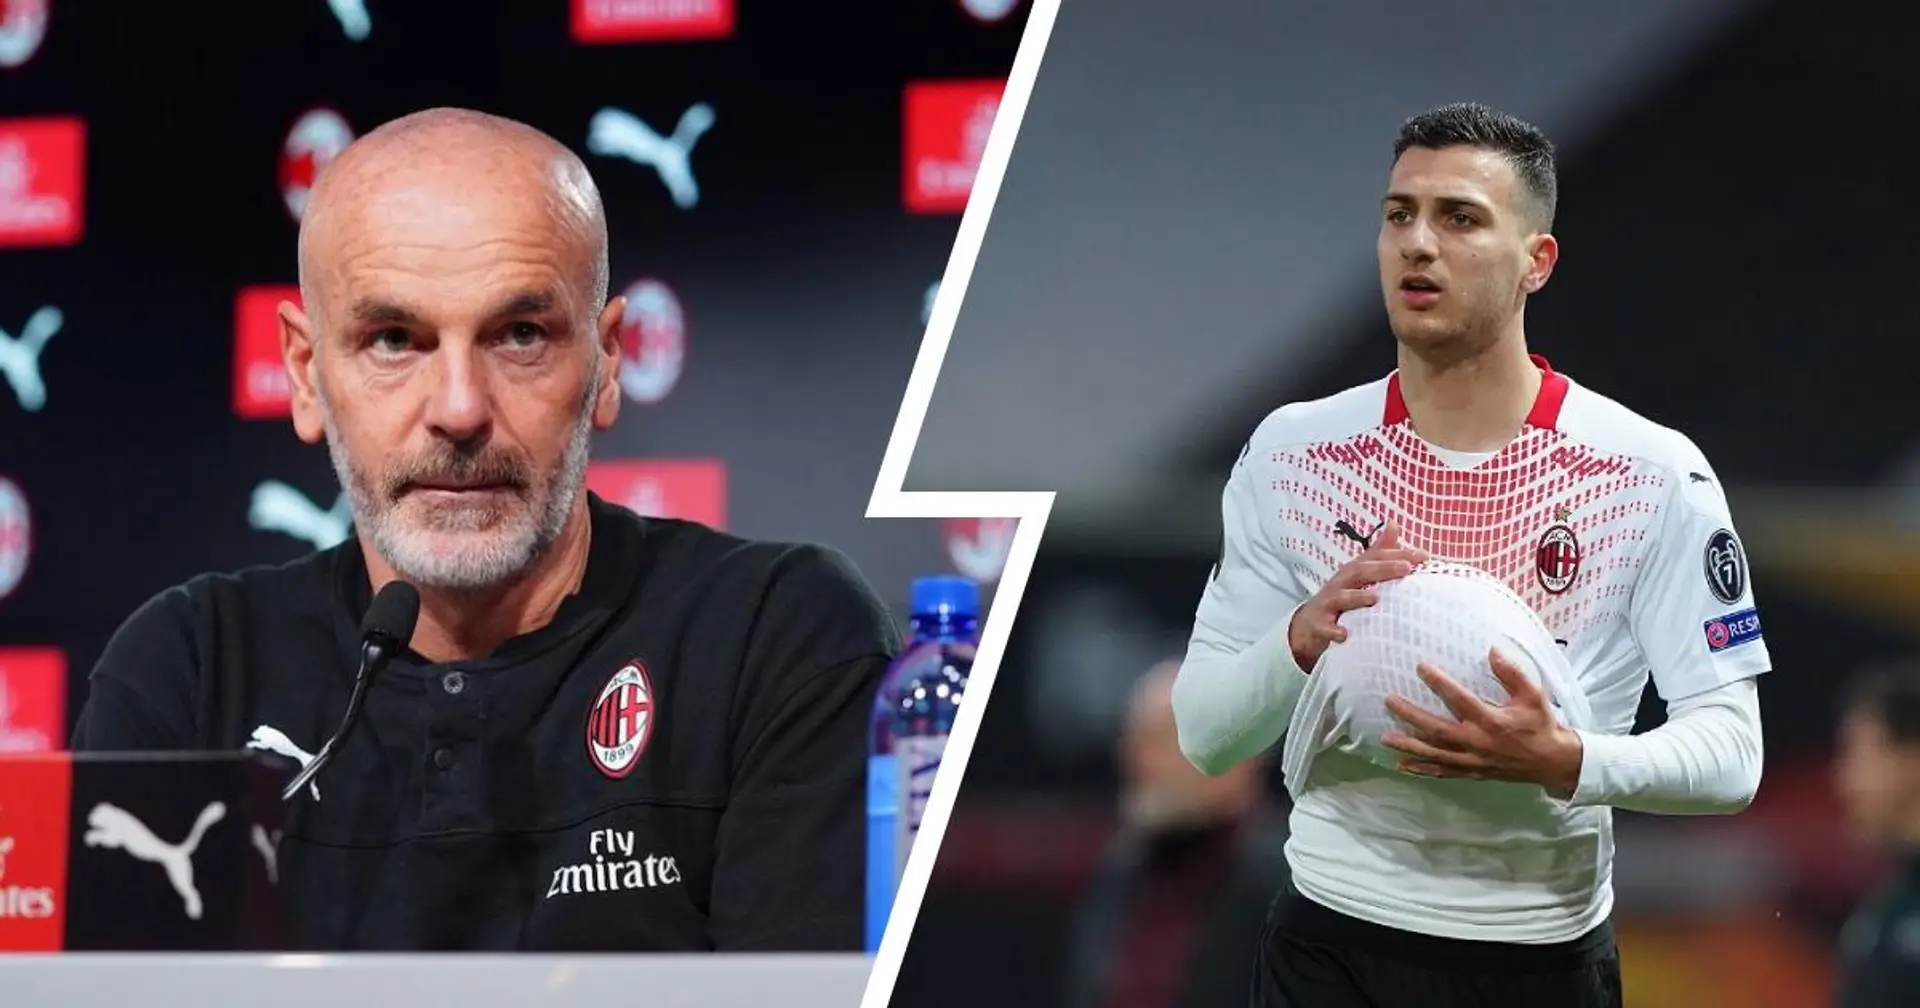 'We're really pleased with his performances': Milan manager Pioli provides update on Dalot's future